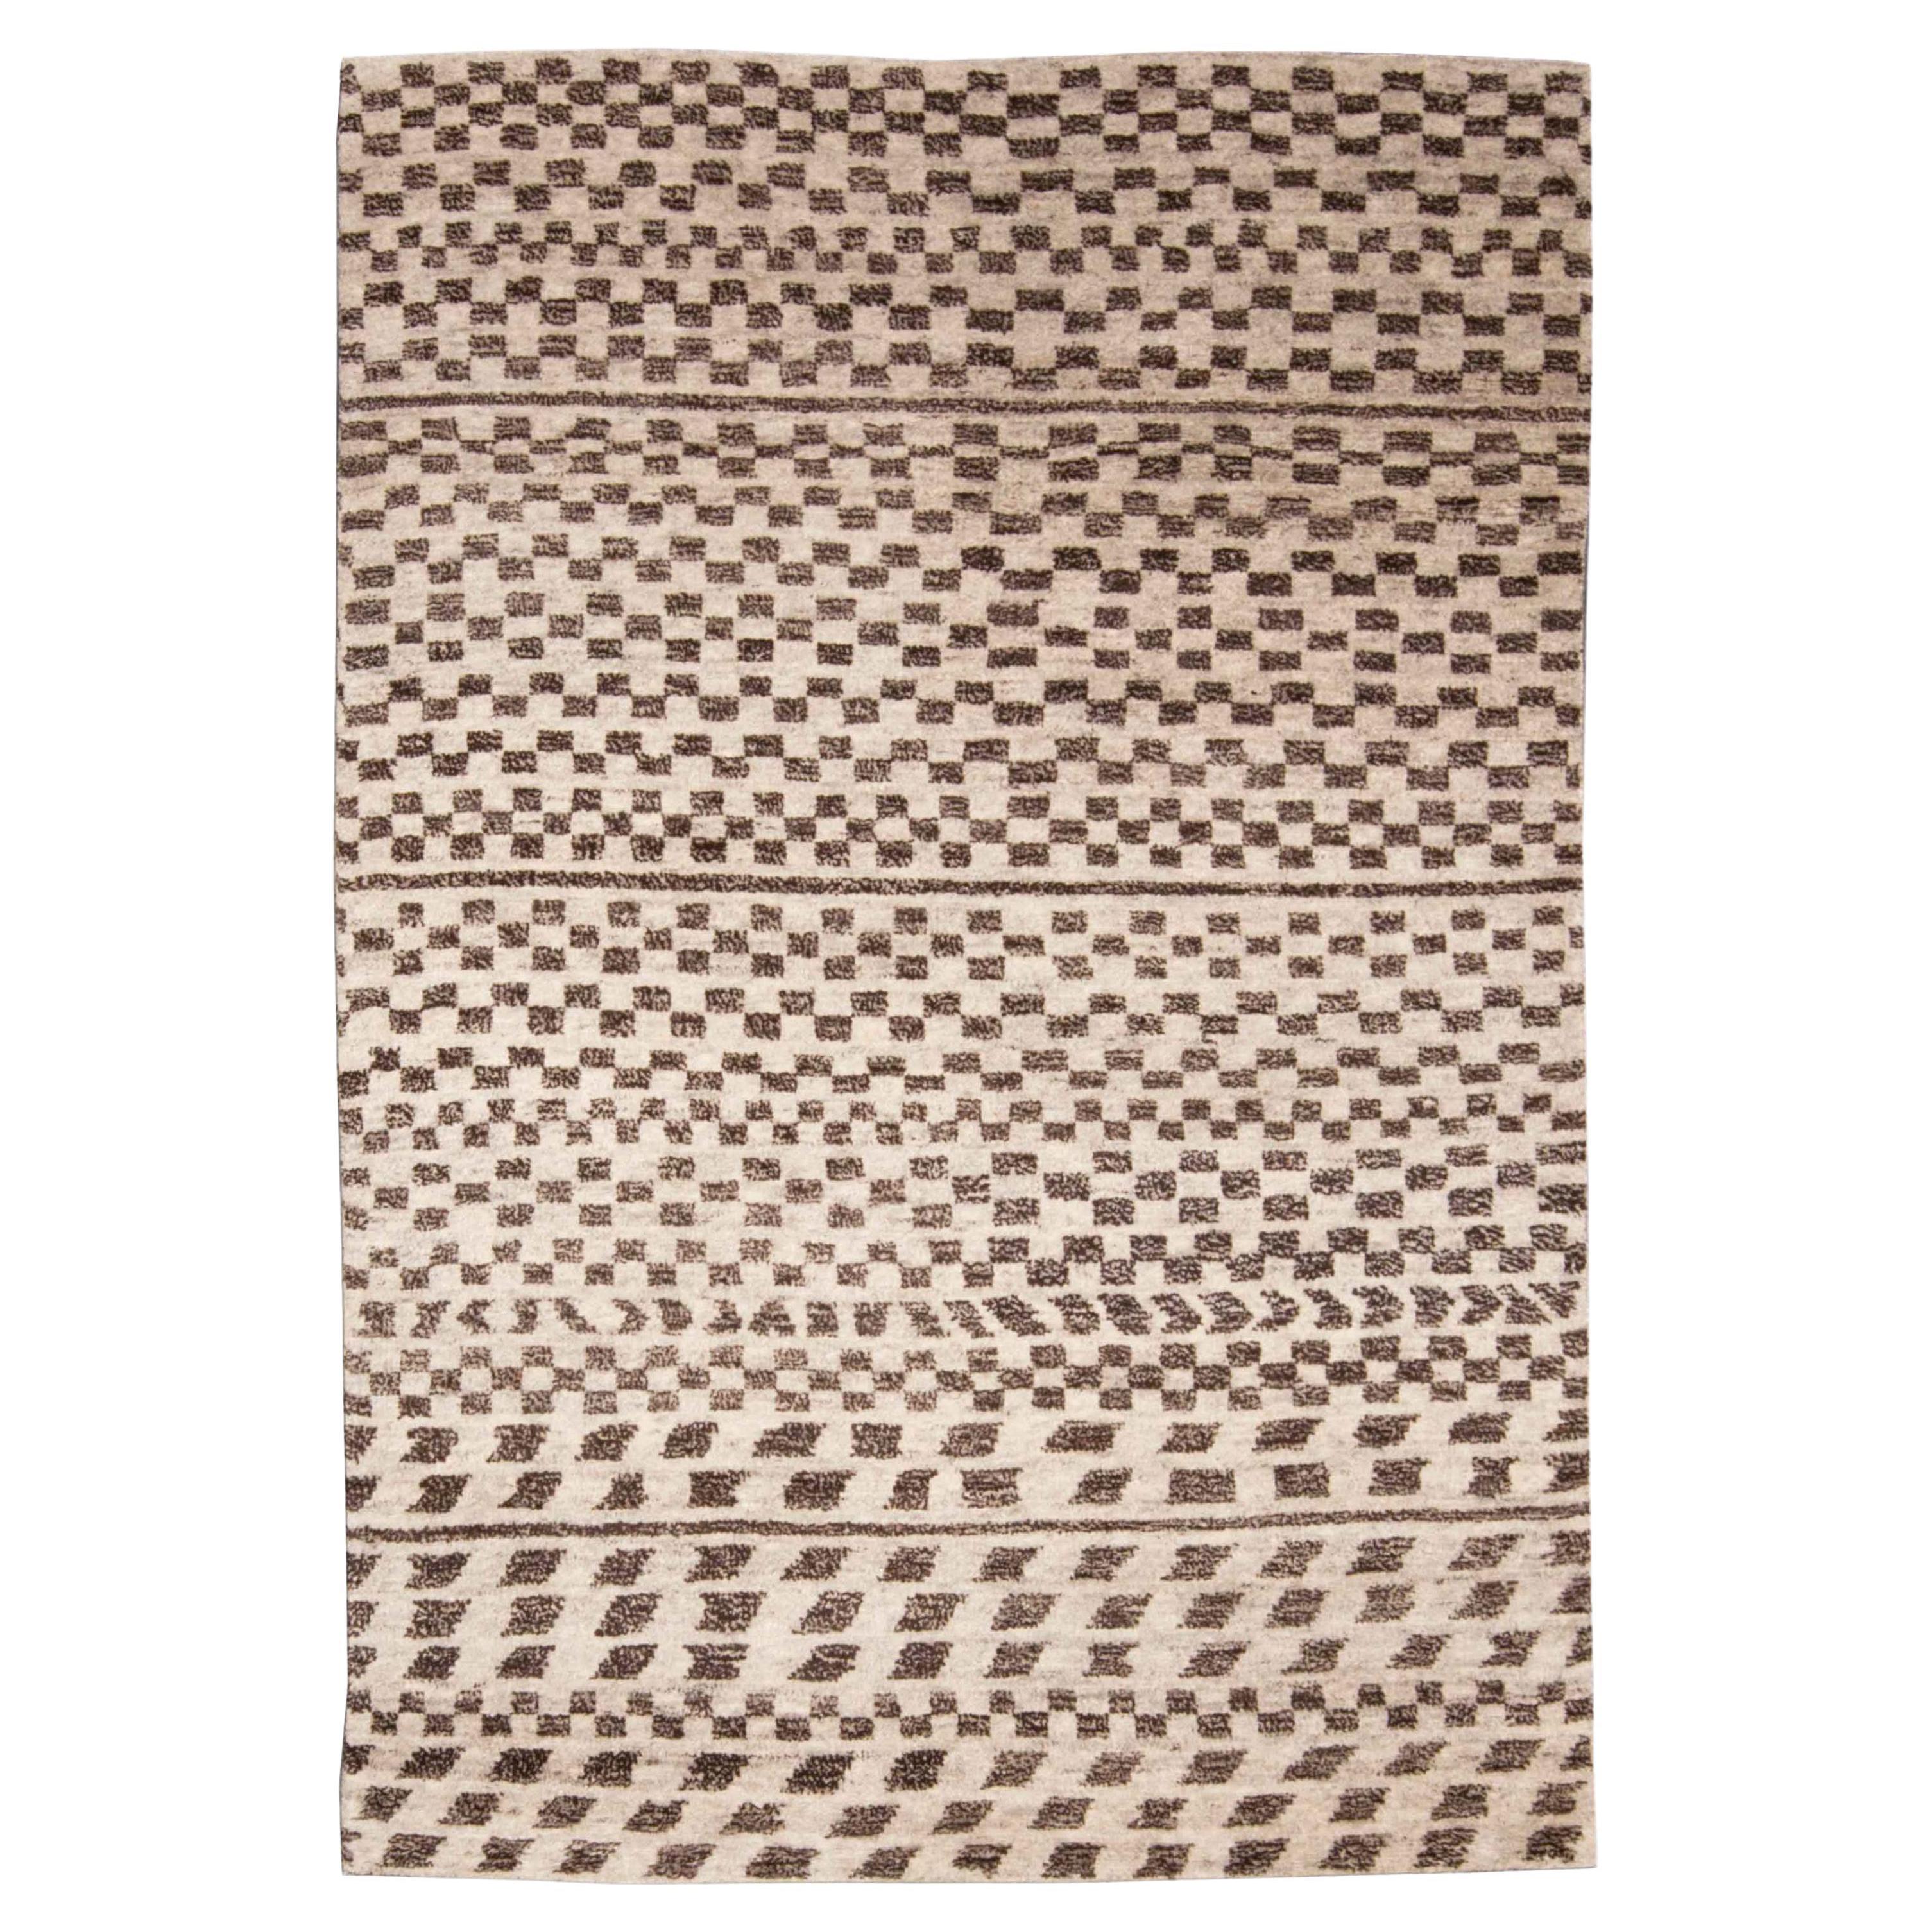 Contemporary Tribal Moroccan Style Hand-Knotted Wool Rug by Doris Leslie Blau For Sale